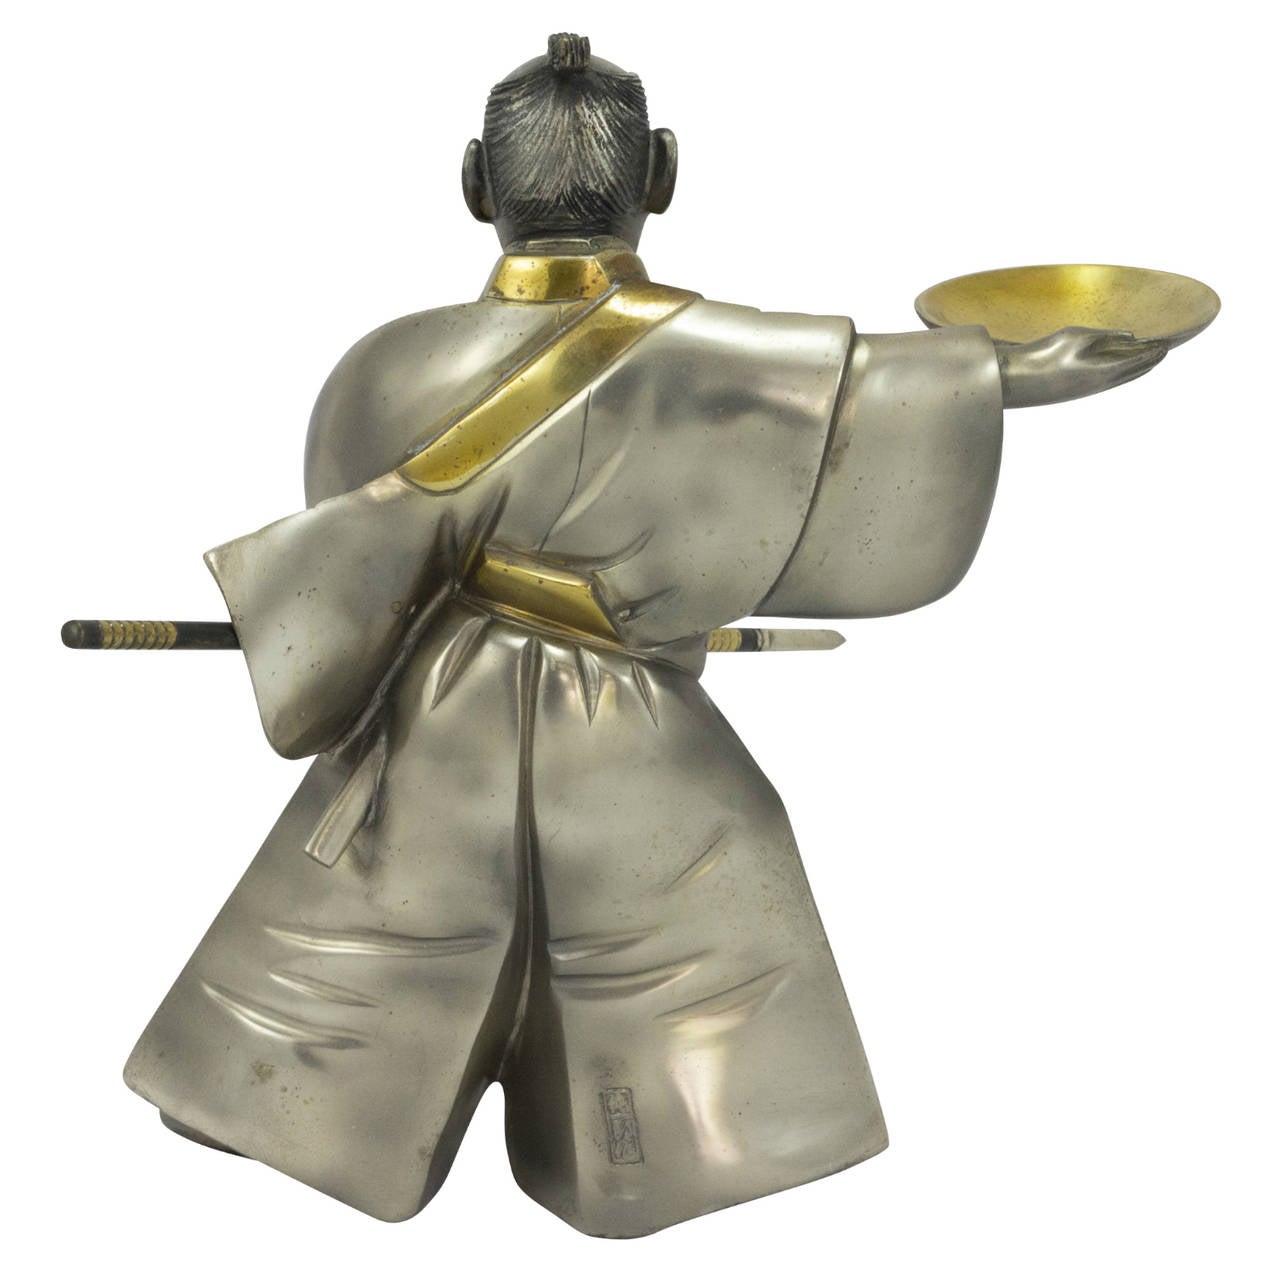 An Art Deco style Japanese samurai figure in silvered bronze. The figure is wielding a spear and has a sheathed katana in his obi. The piece features gilding to his sash, bowl and weapon decorations.